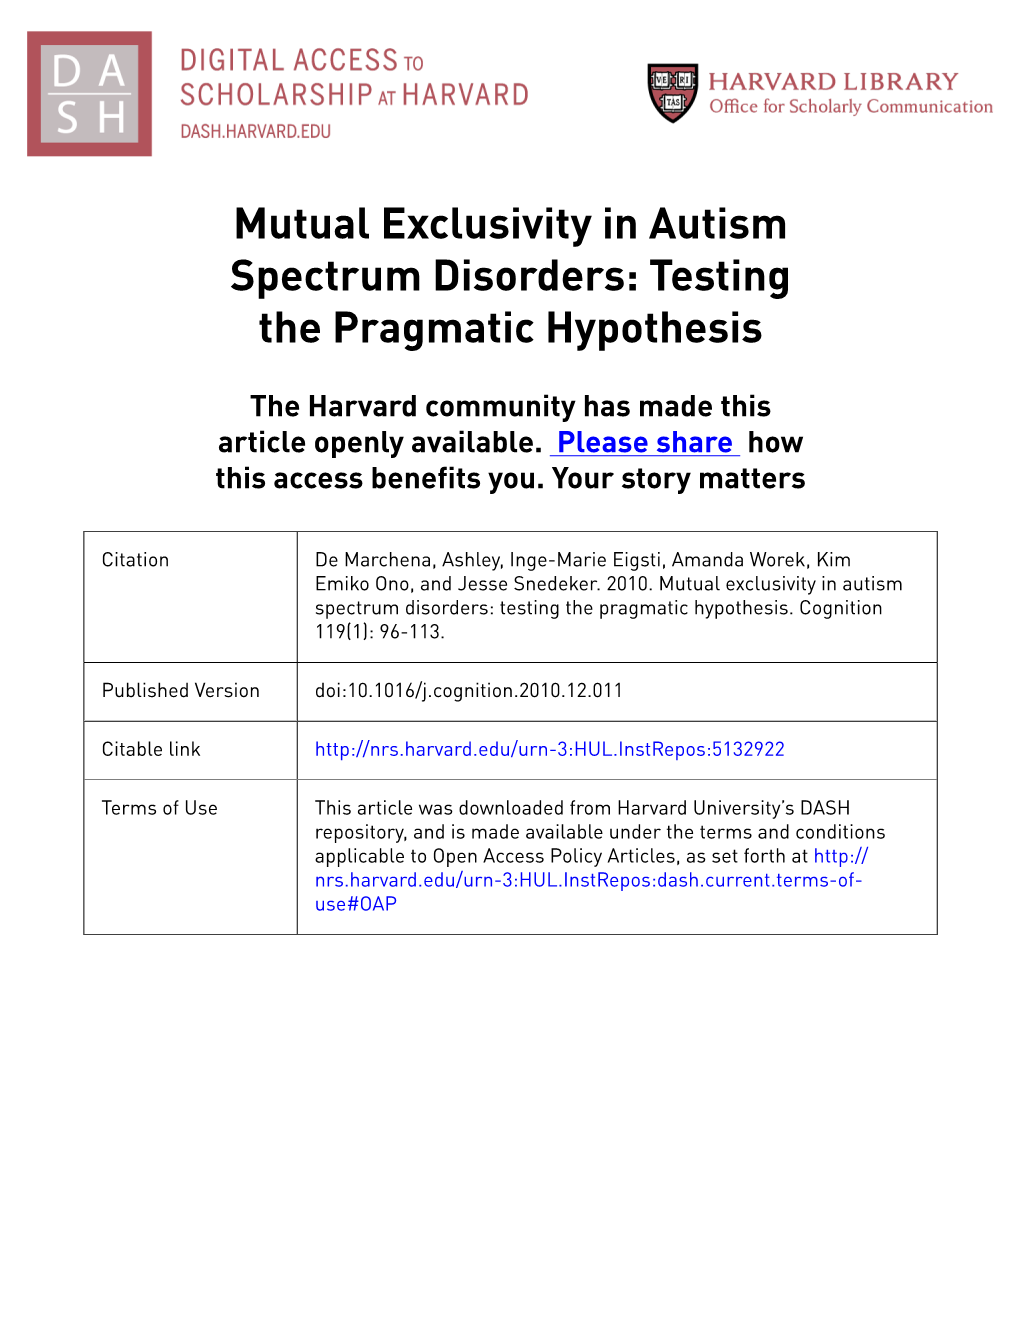 Mutual Exclusivity in Autism Spectrum Disorders: Testing the Pragmatic Hypothesis